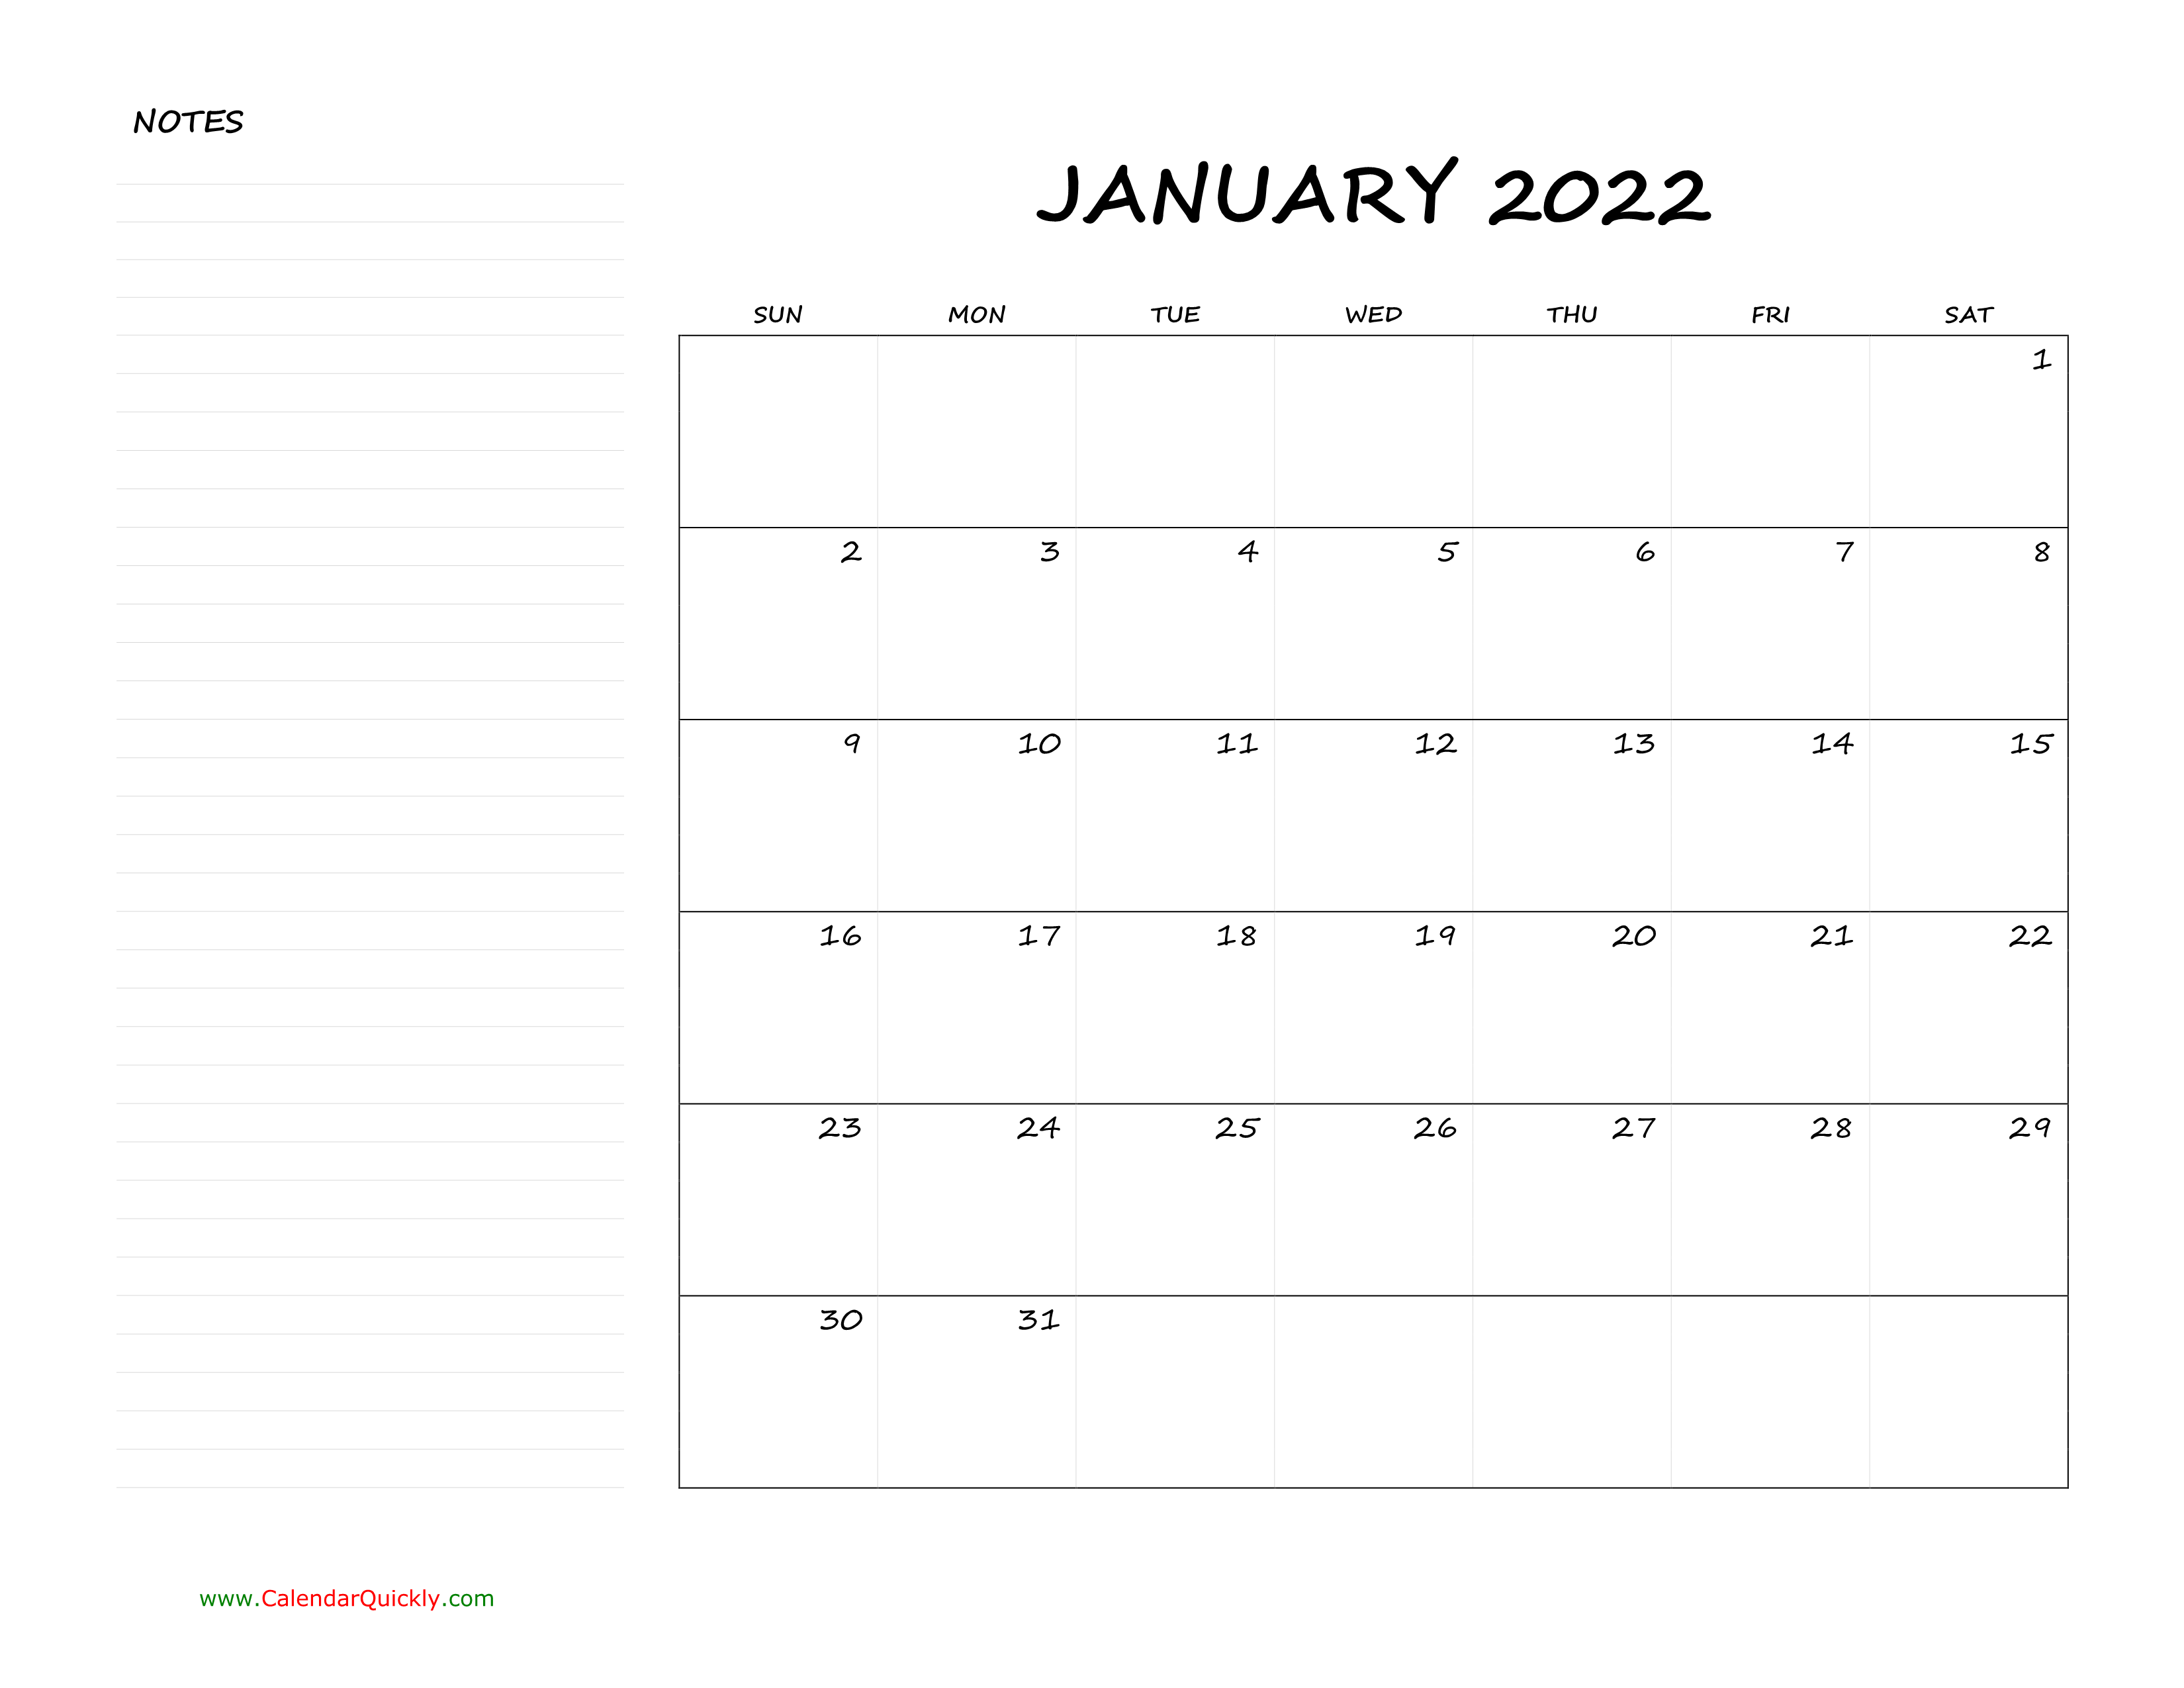 monthly-blank-calendar-2022-with-notes-calendar-quickly